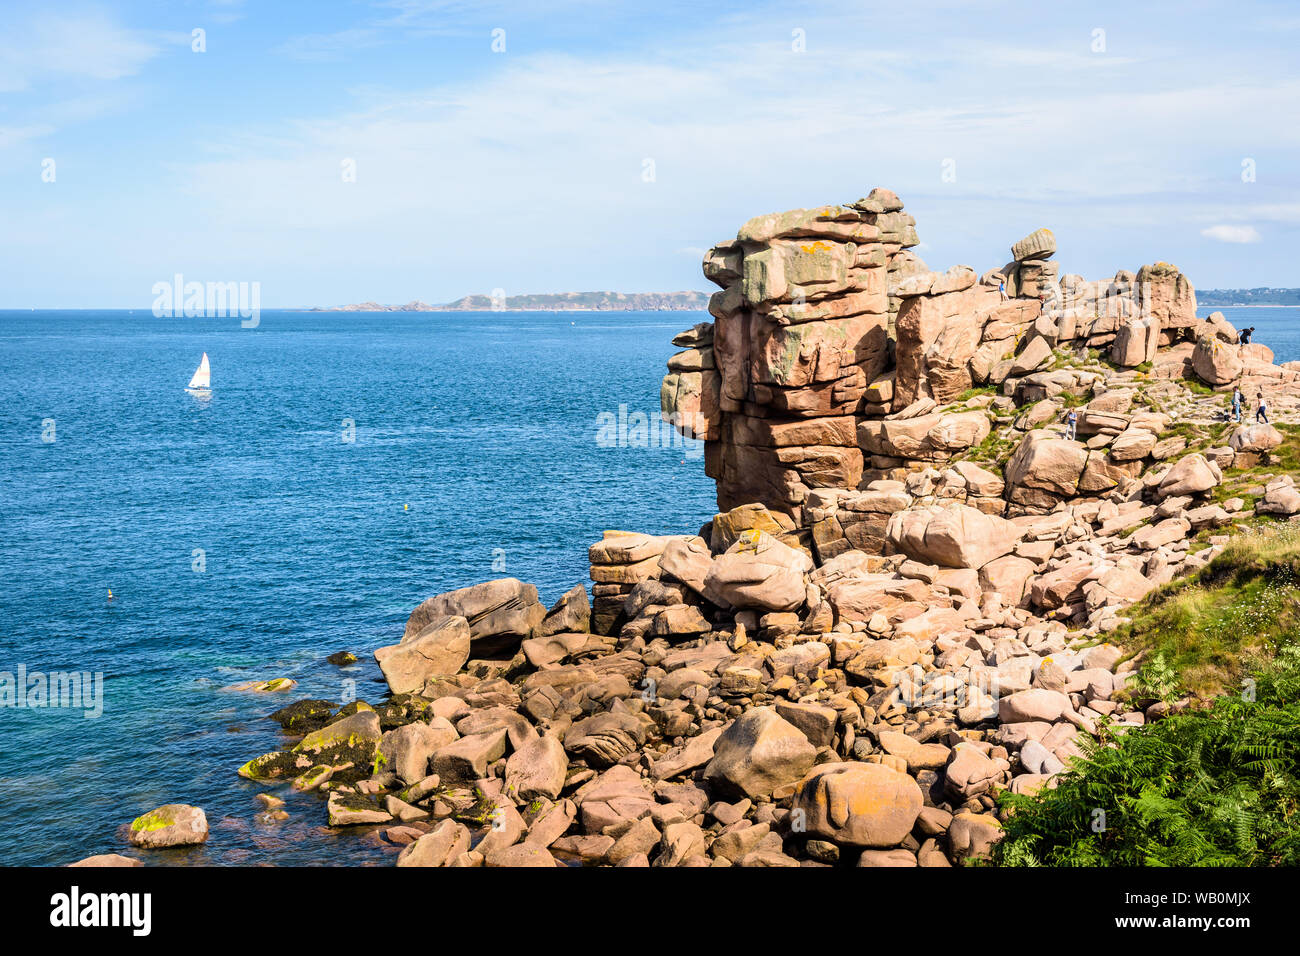 Granite blockfield on the Pink Granite Coast in northern Brittany, France, with a small catamaran sailing on the sea in the distance. Stock Photo